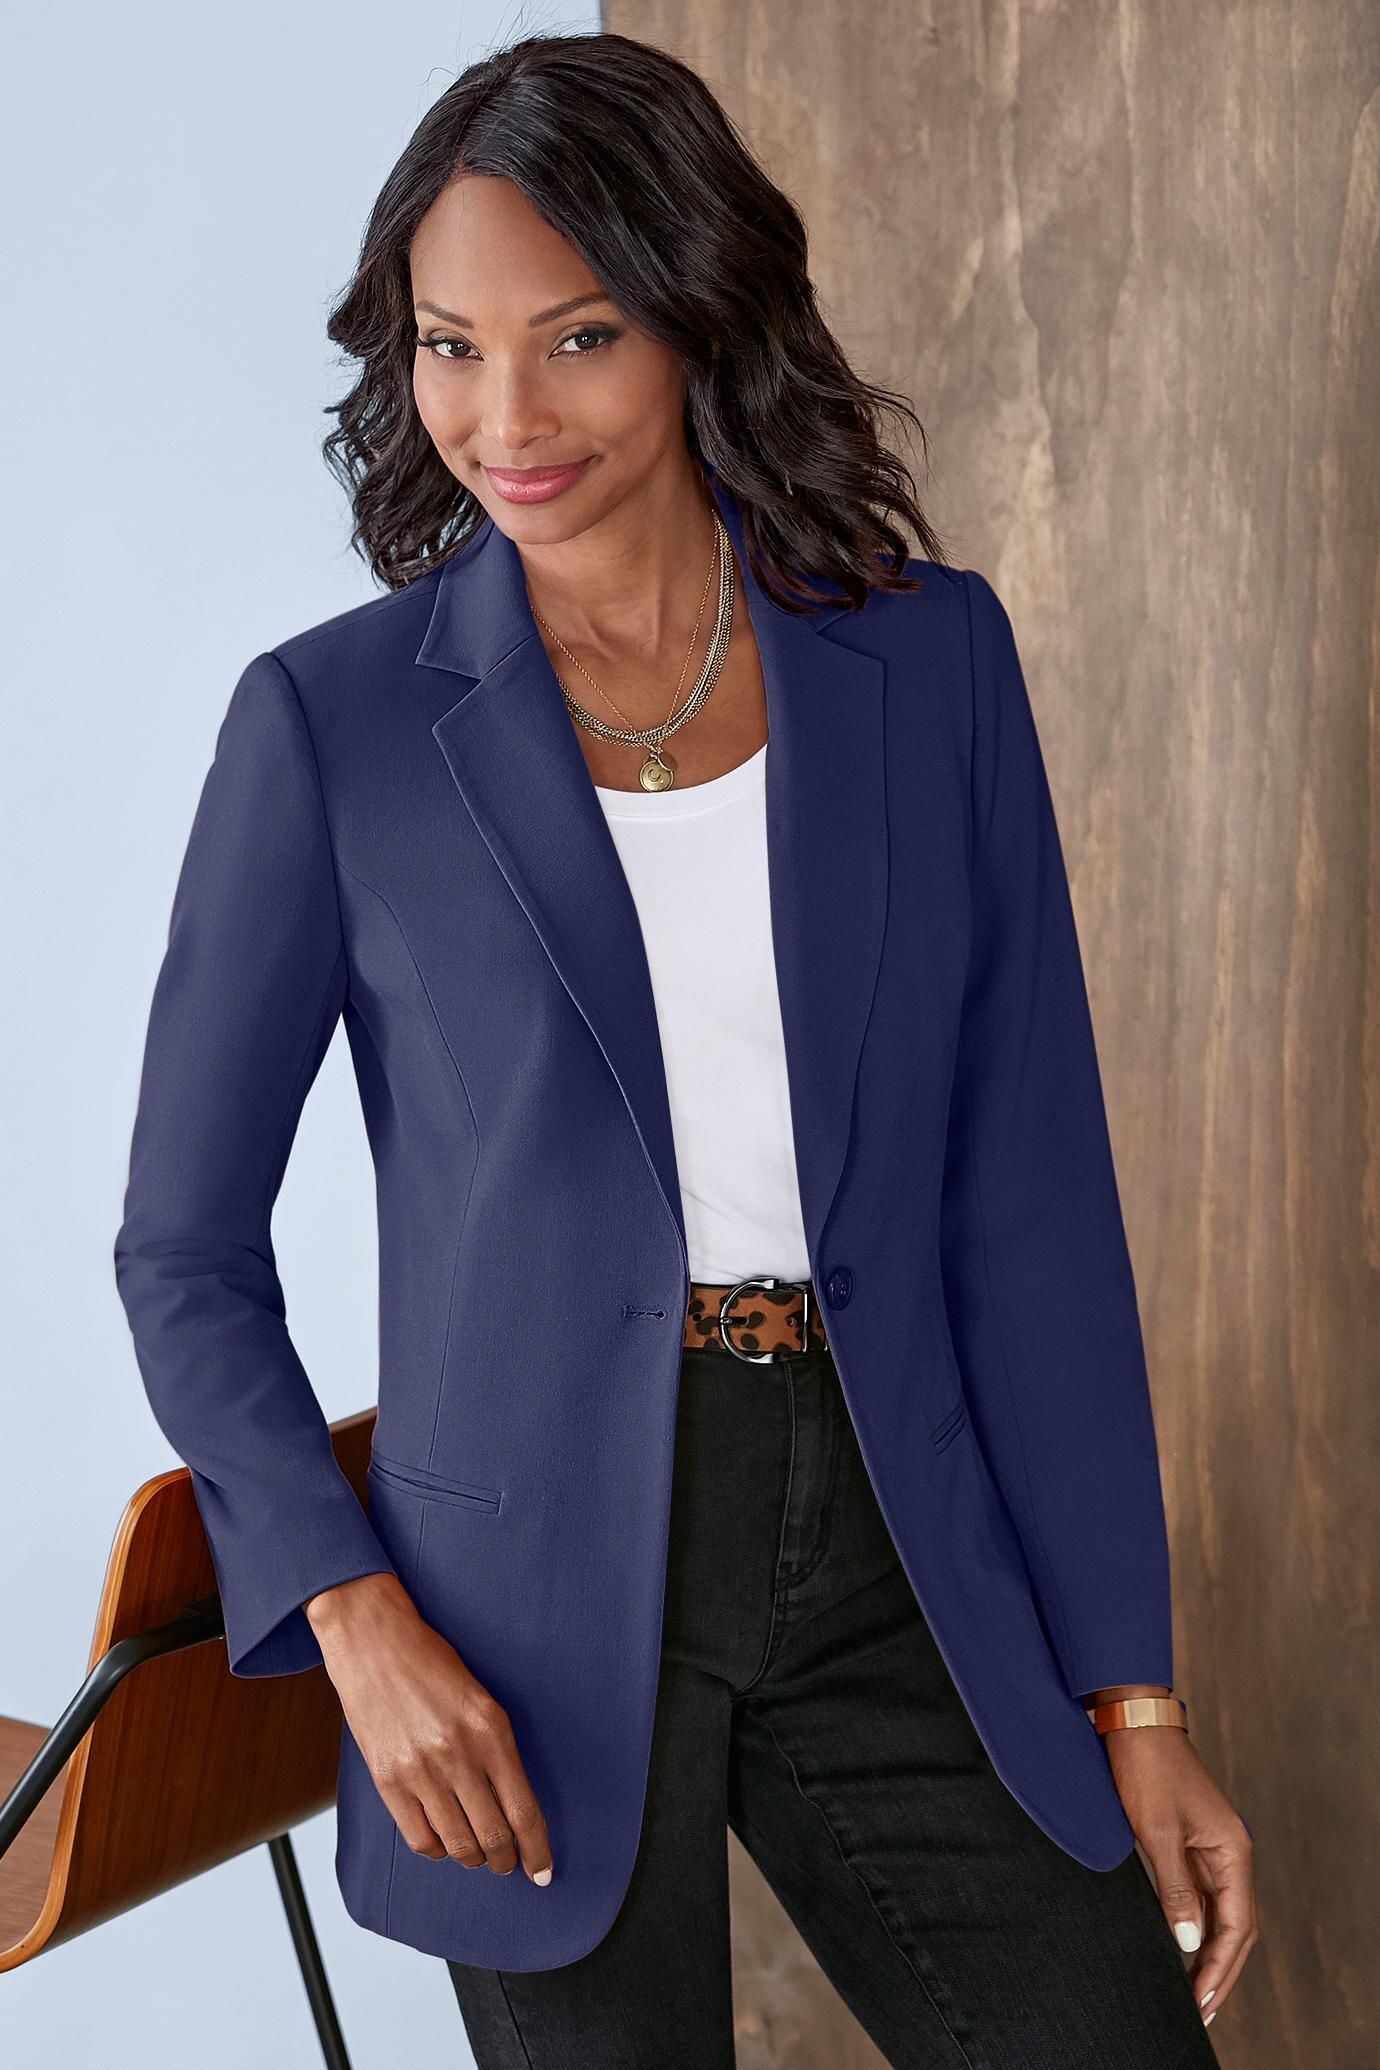 “Power Dressing 101: Styling Blazers for Success”